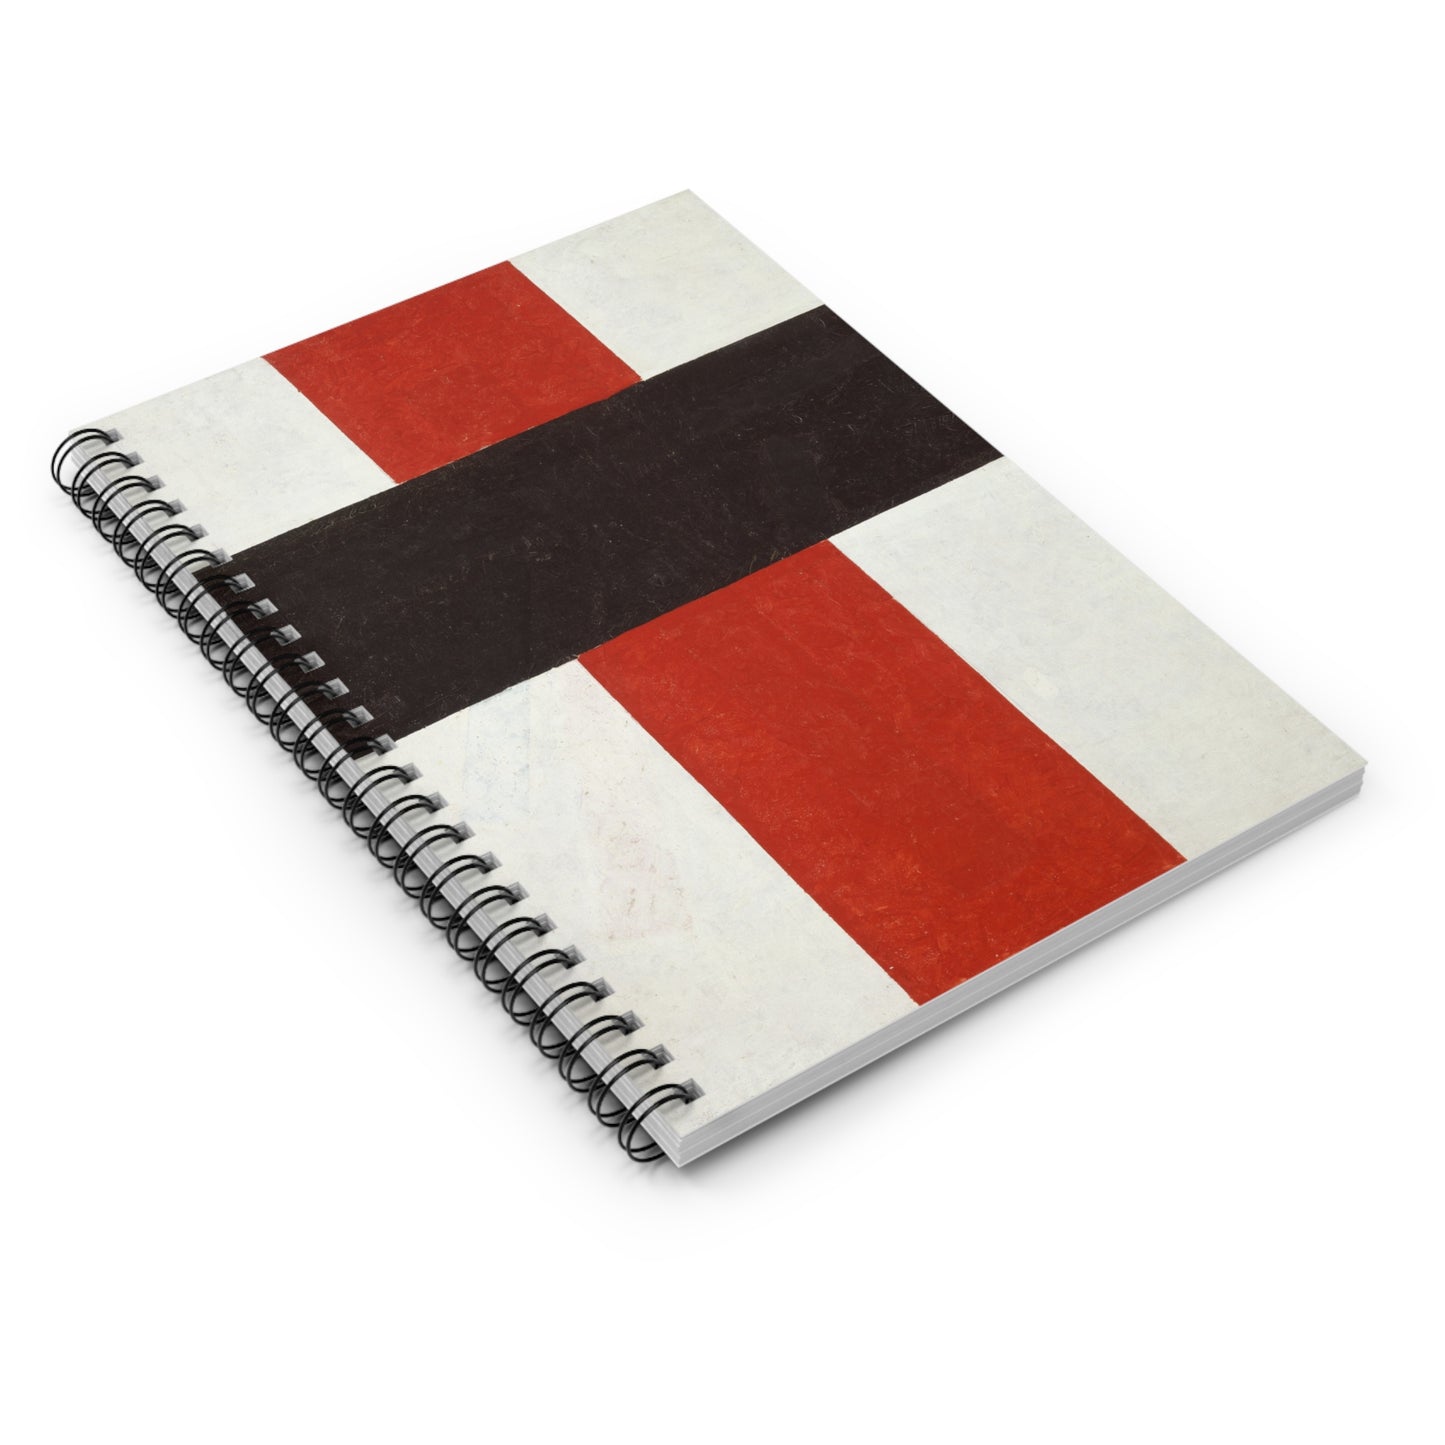 KAZIMIR MALEVICH - LARGE CROSSIN BLACK OVER RED ON WHITE